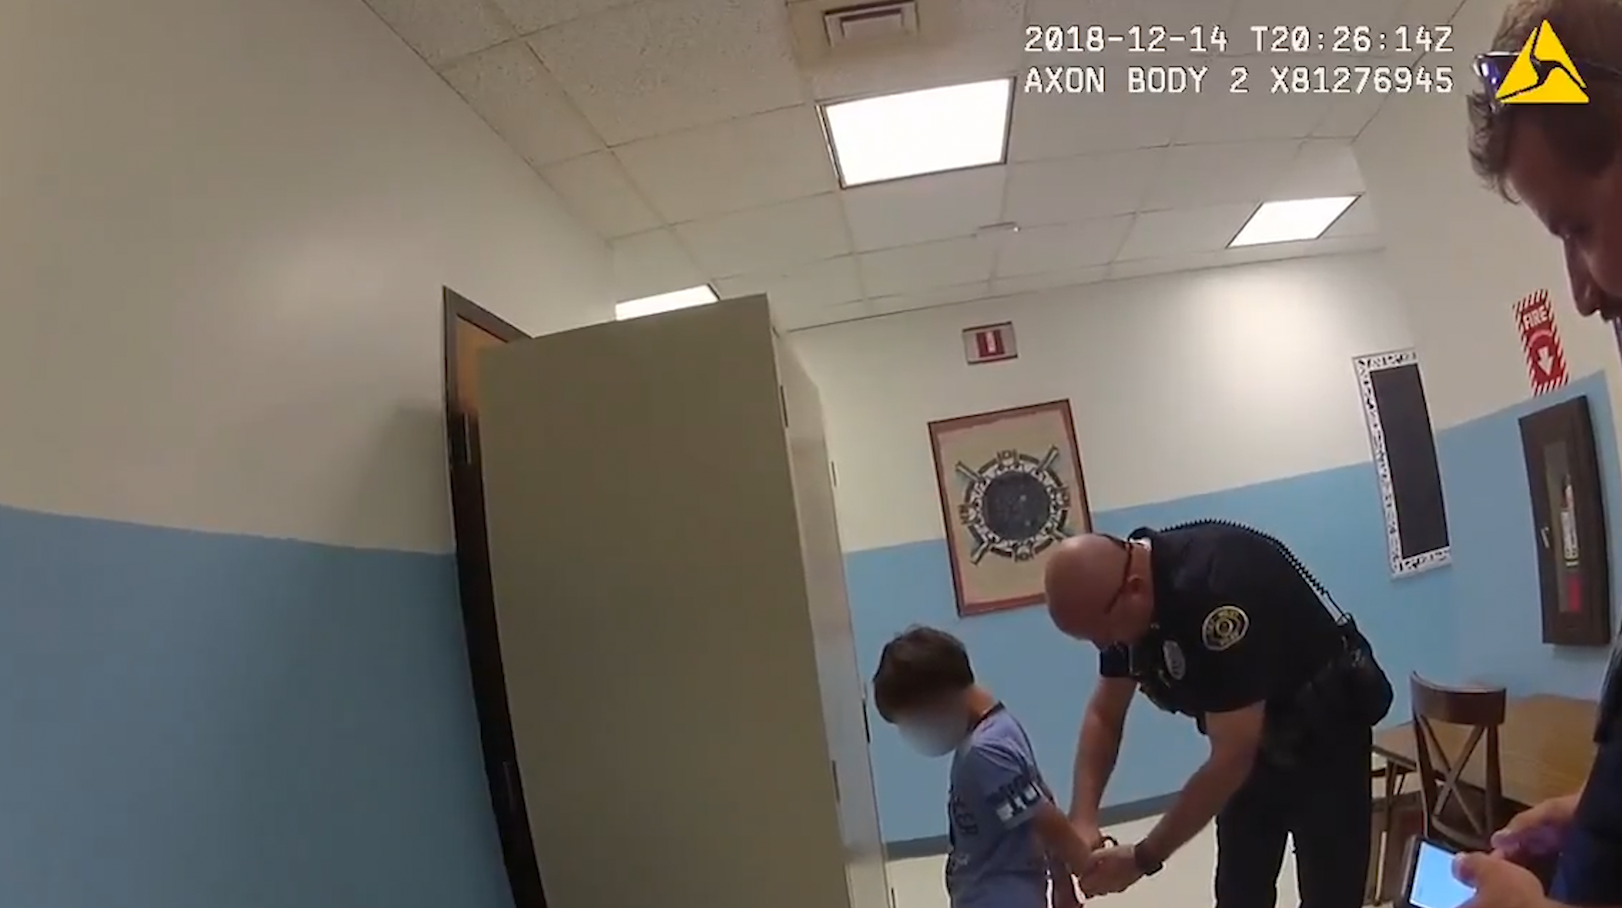 Body-cam video shows 8-year-old Florida boy with disabilities being  arrested - The Washington Post